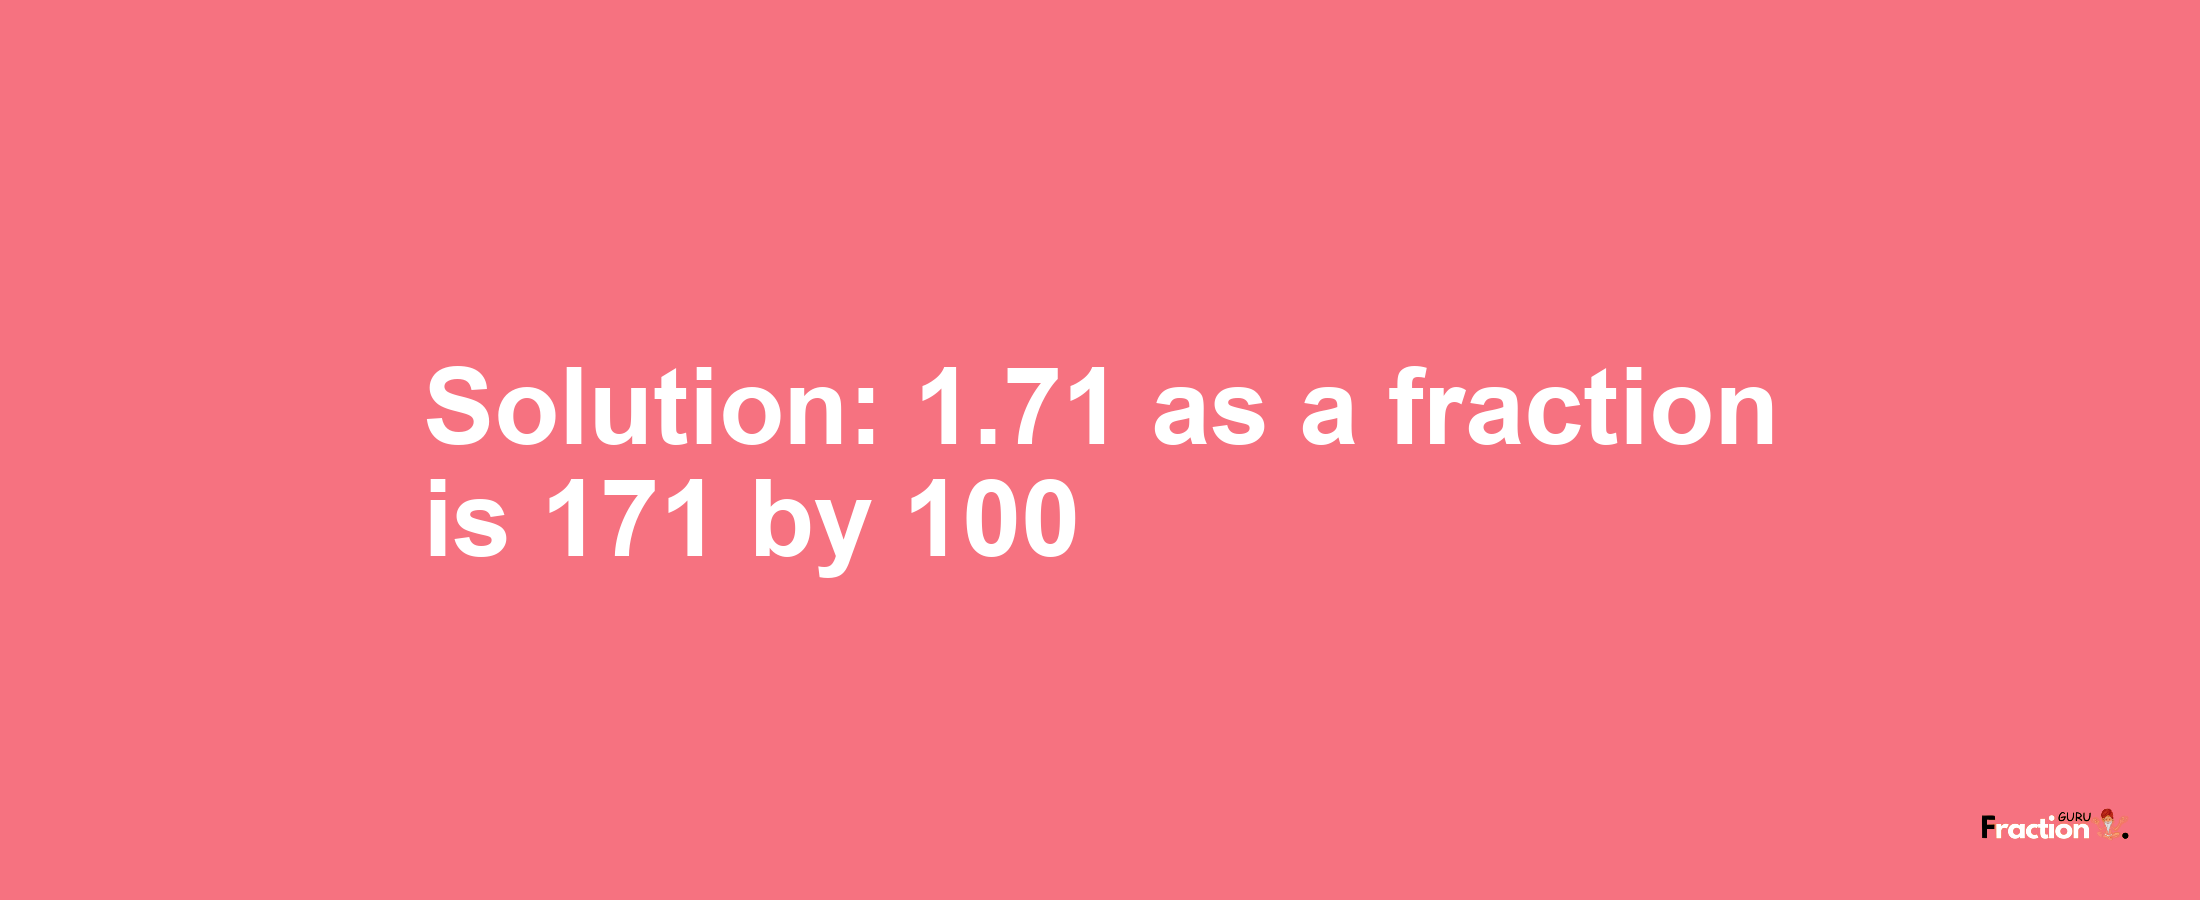 Solution:1.71 as a fraction is 171/100